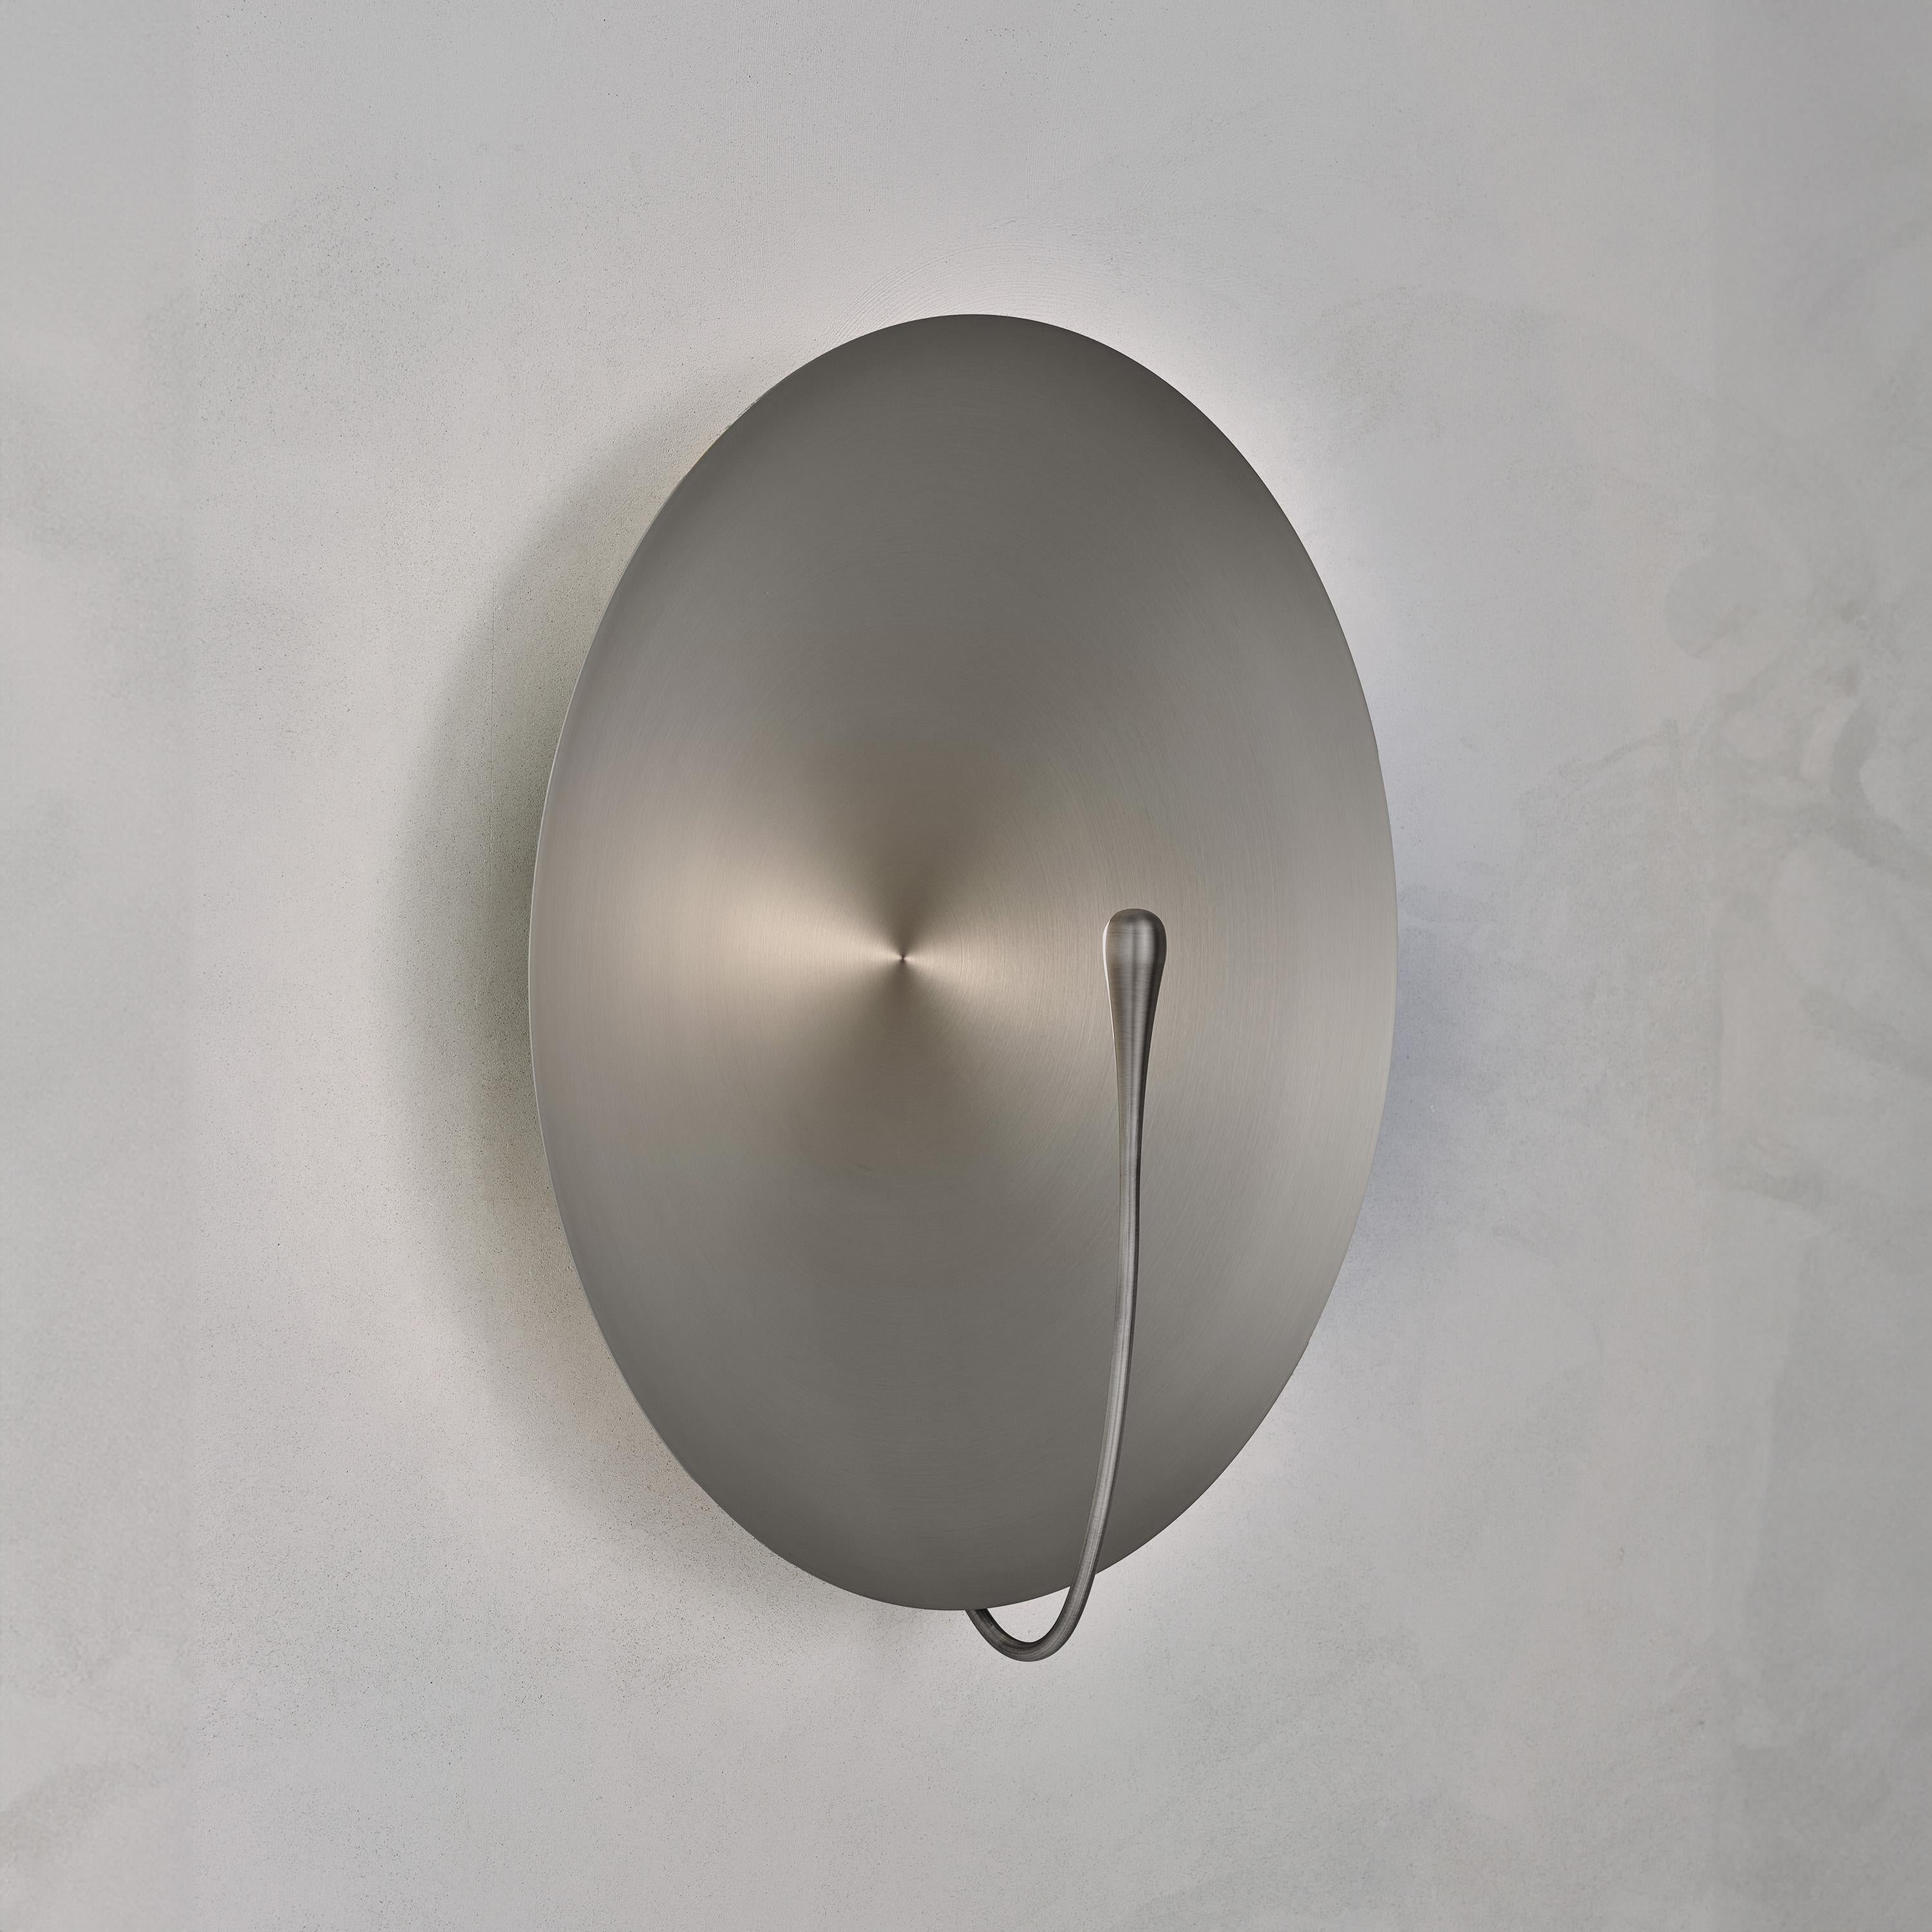 British 'Cosmic Seleno XL' Handmade Brushed Steel Contemporary Wall Light Sconce For Sale